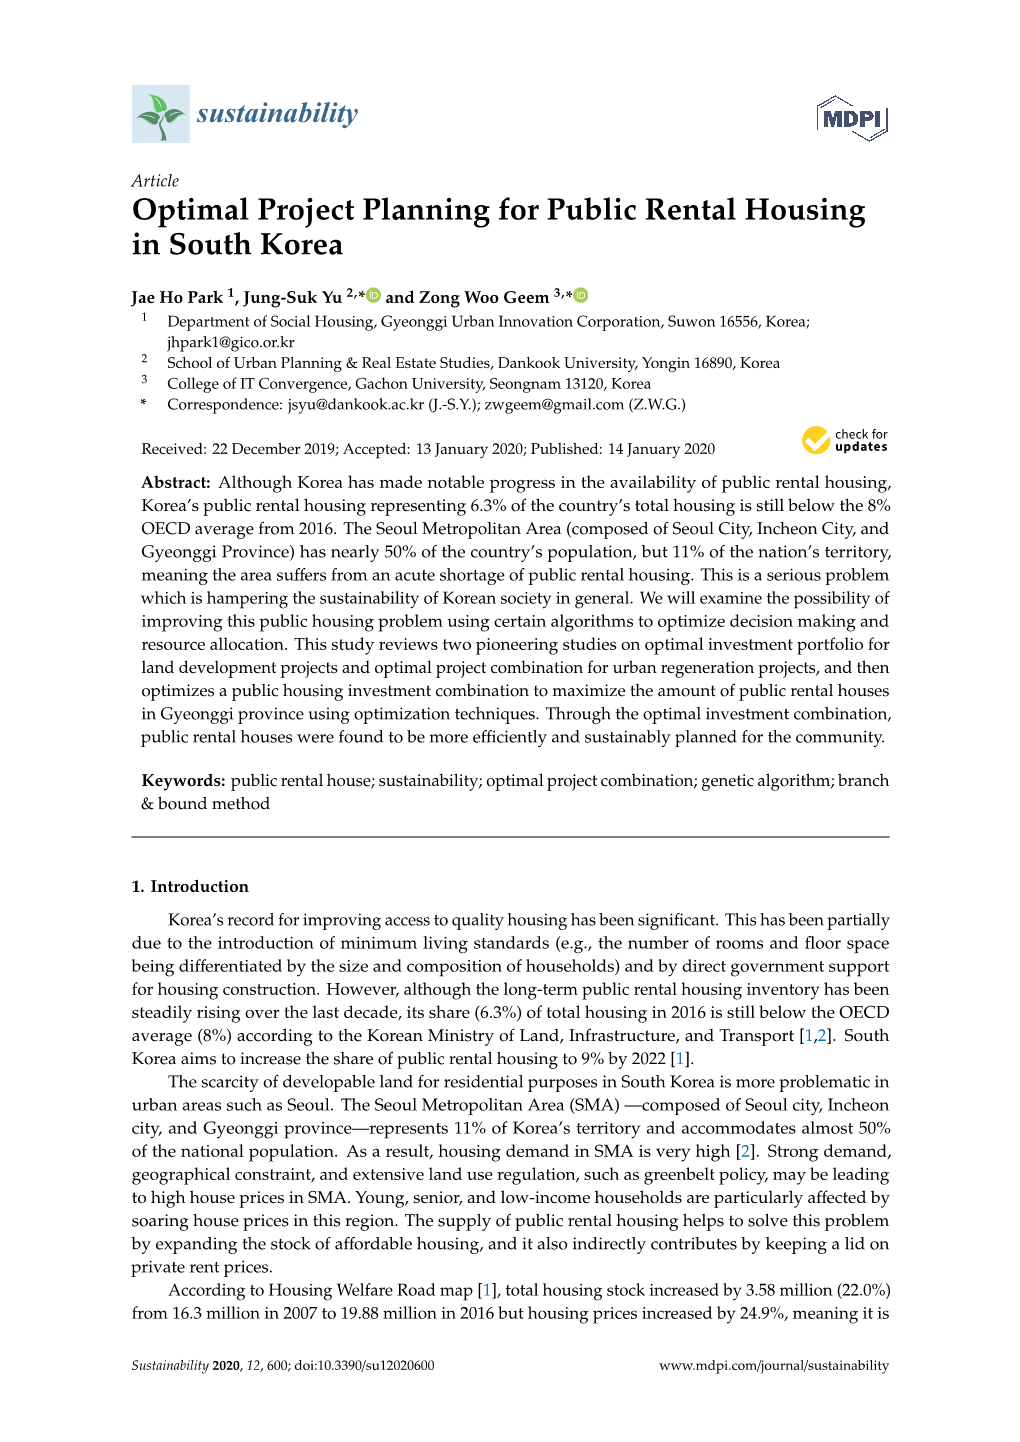 Optimal Project Planning for Public Rental Housing in South Korea